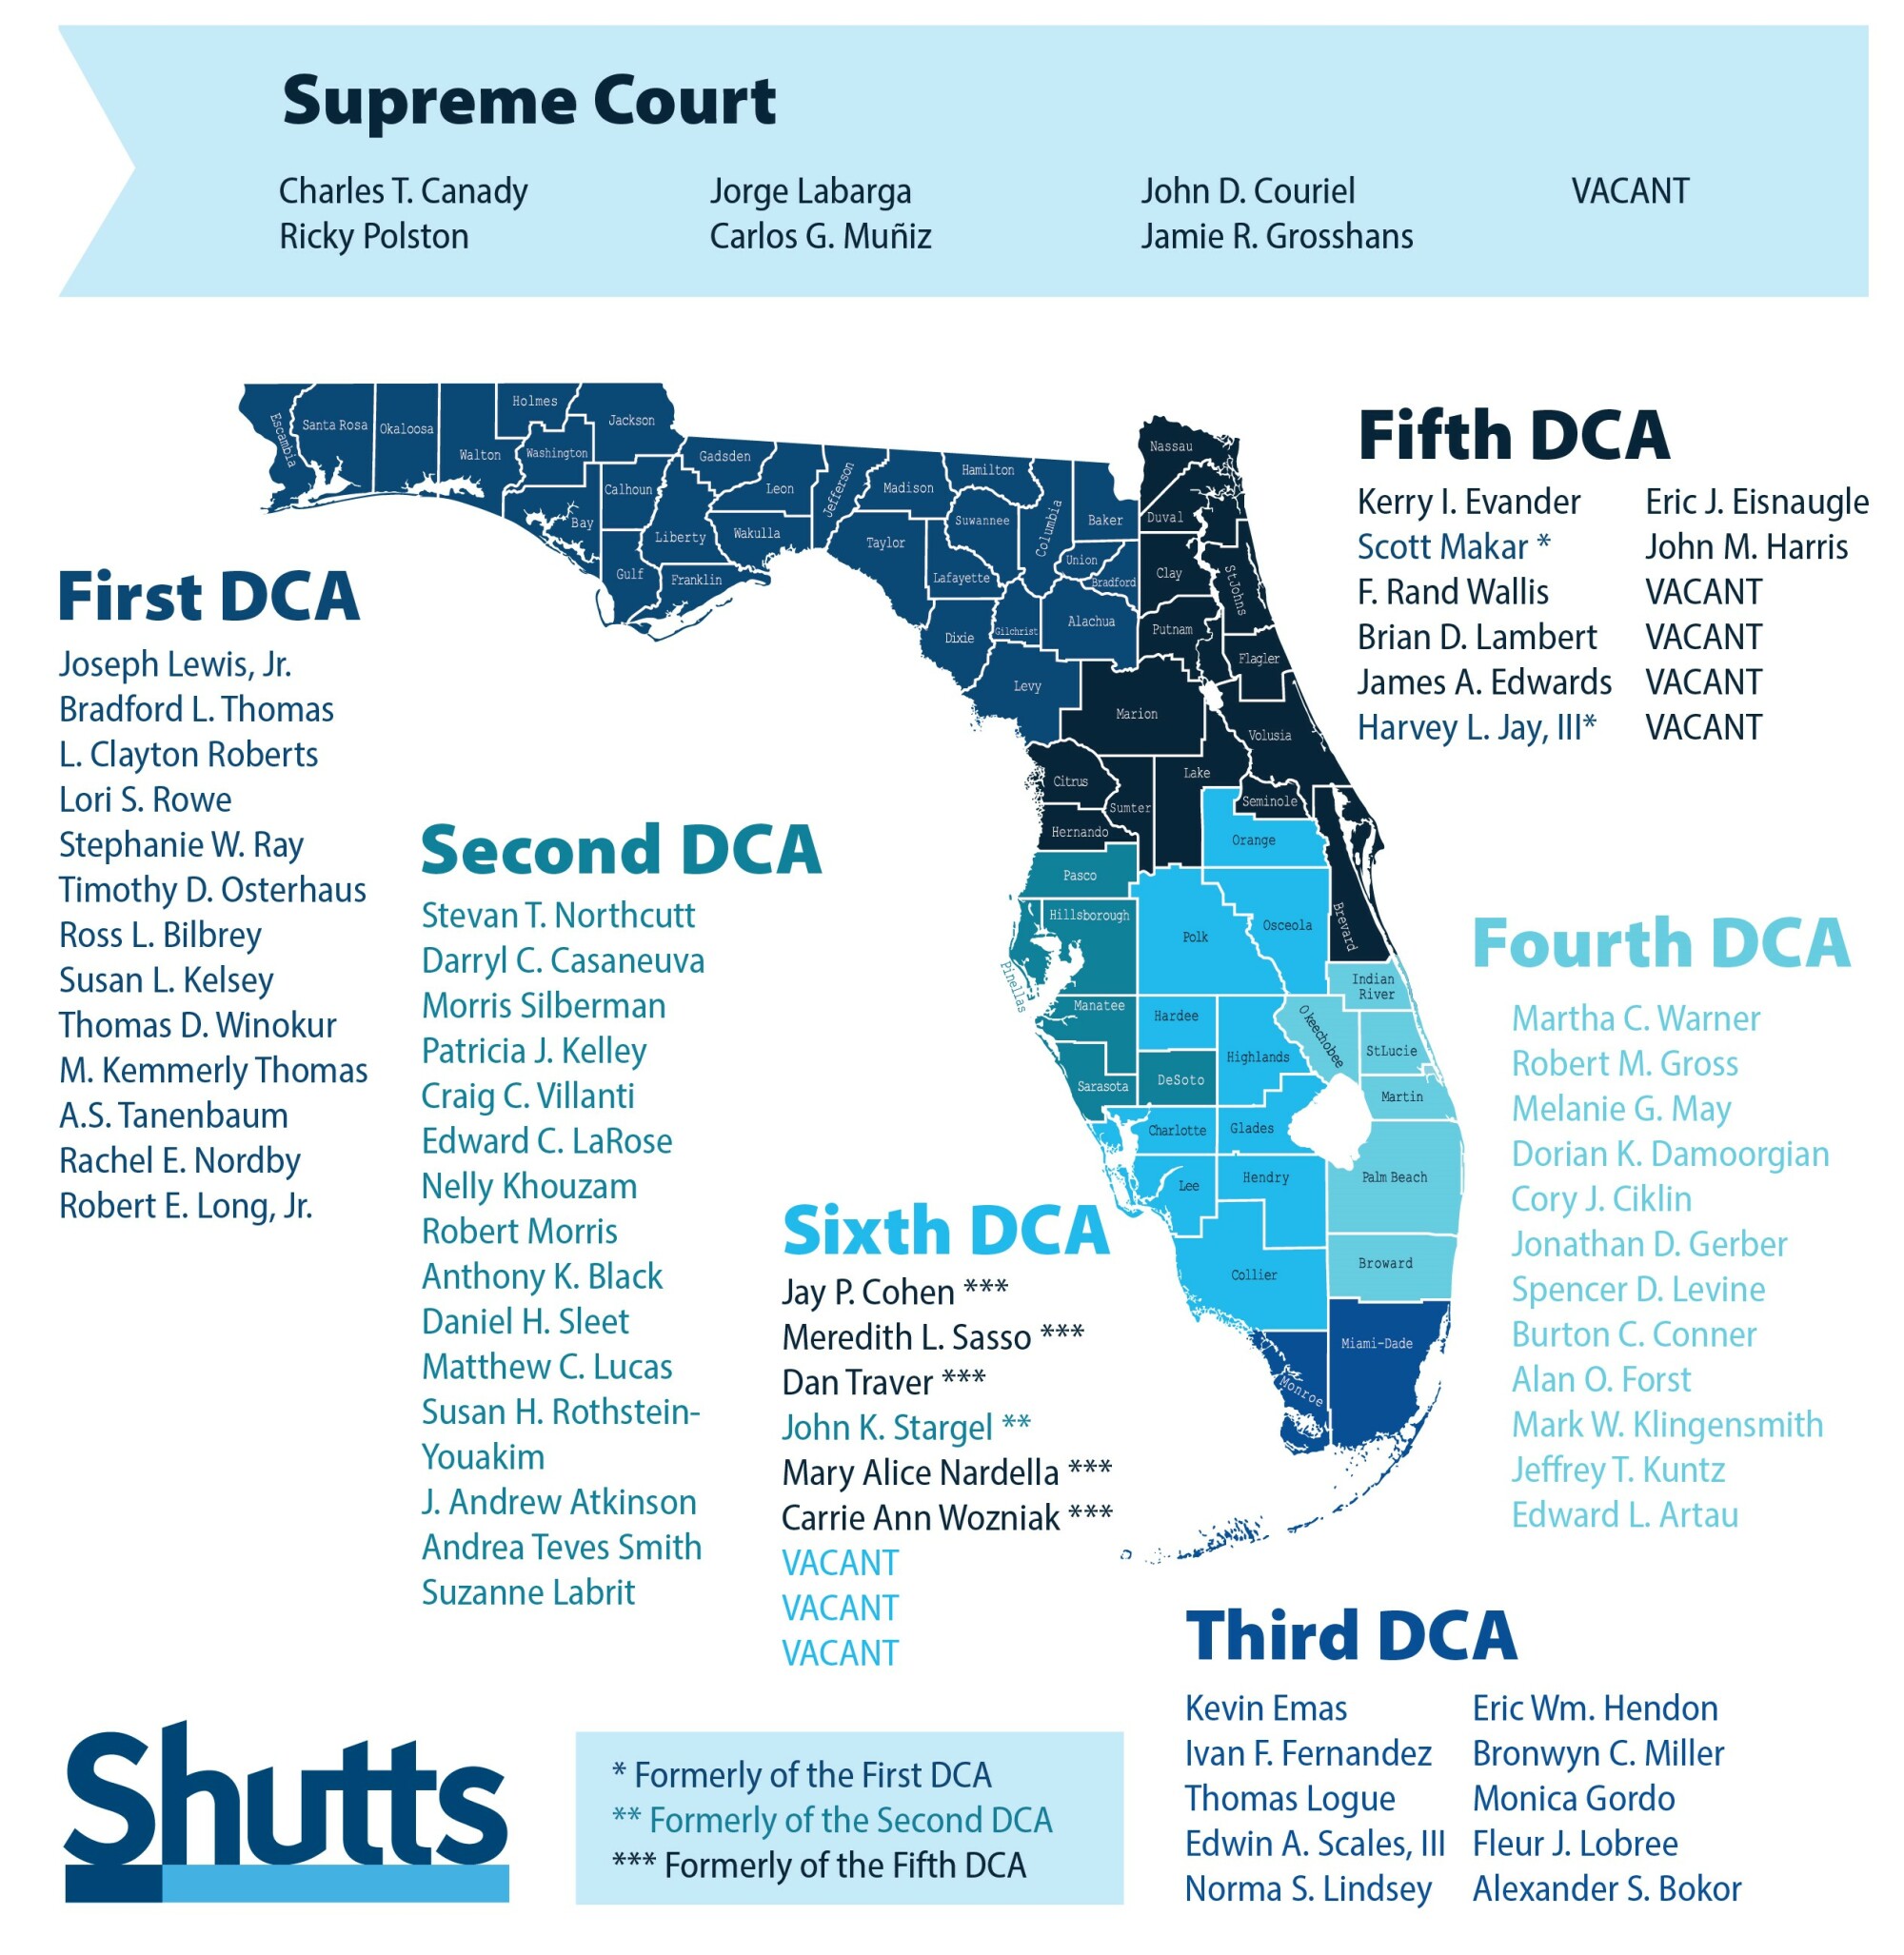 Florida District Courts of Appeal - Justices